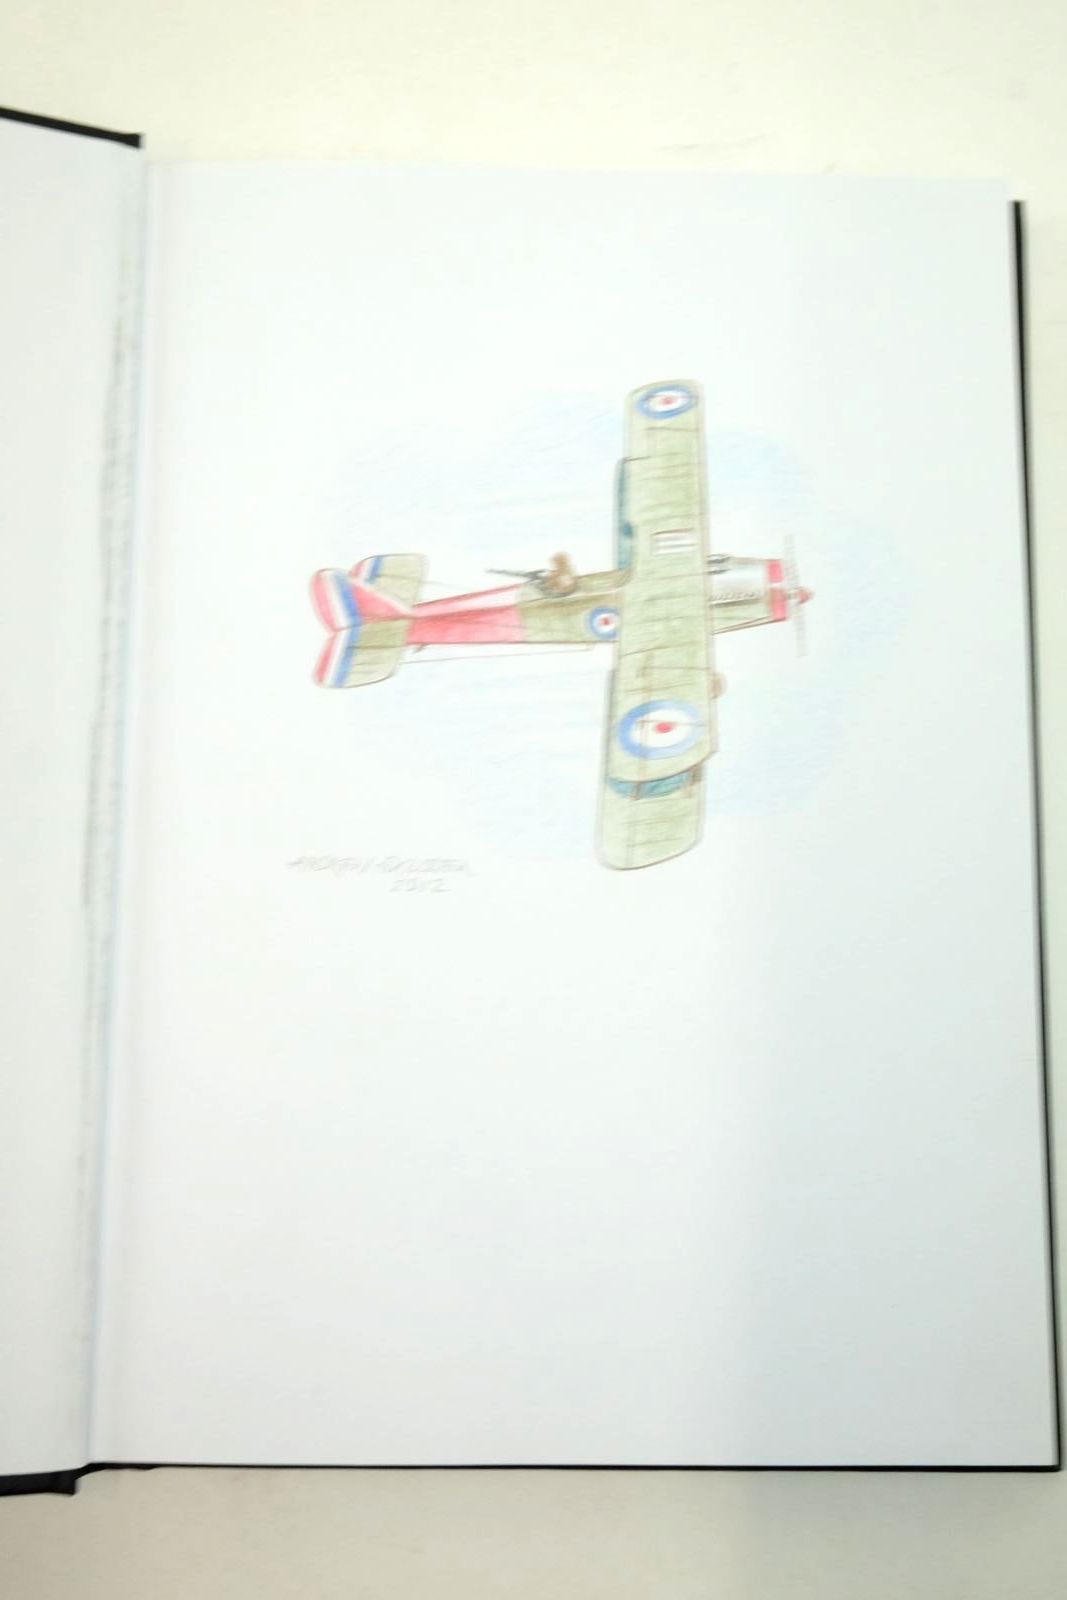 Photo of THE RESCUE FLIGHT written by Johns, W.E. illustrated by Skilleter, Andrew
Leigh, Howard
Wilson, Radcliffe published by Norman Wright (STOCK CODE: 2138303)  for sale by Stella & Rose's Books